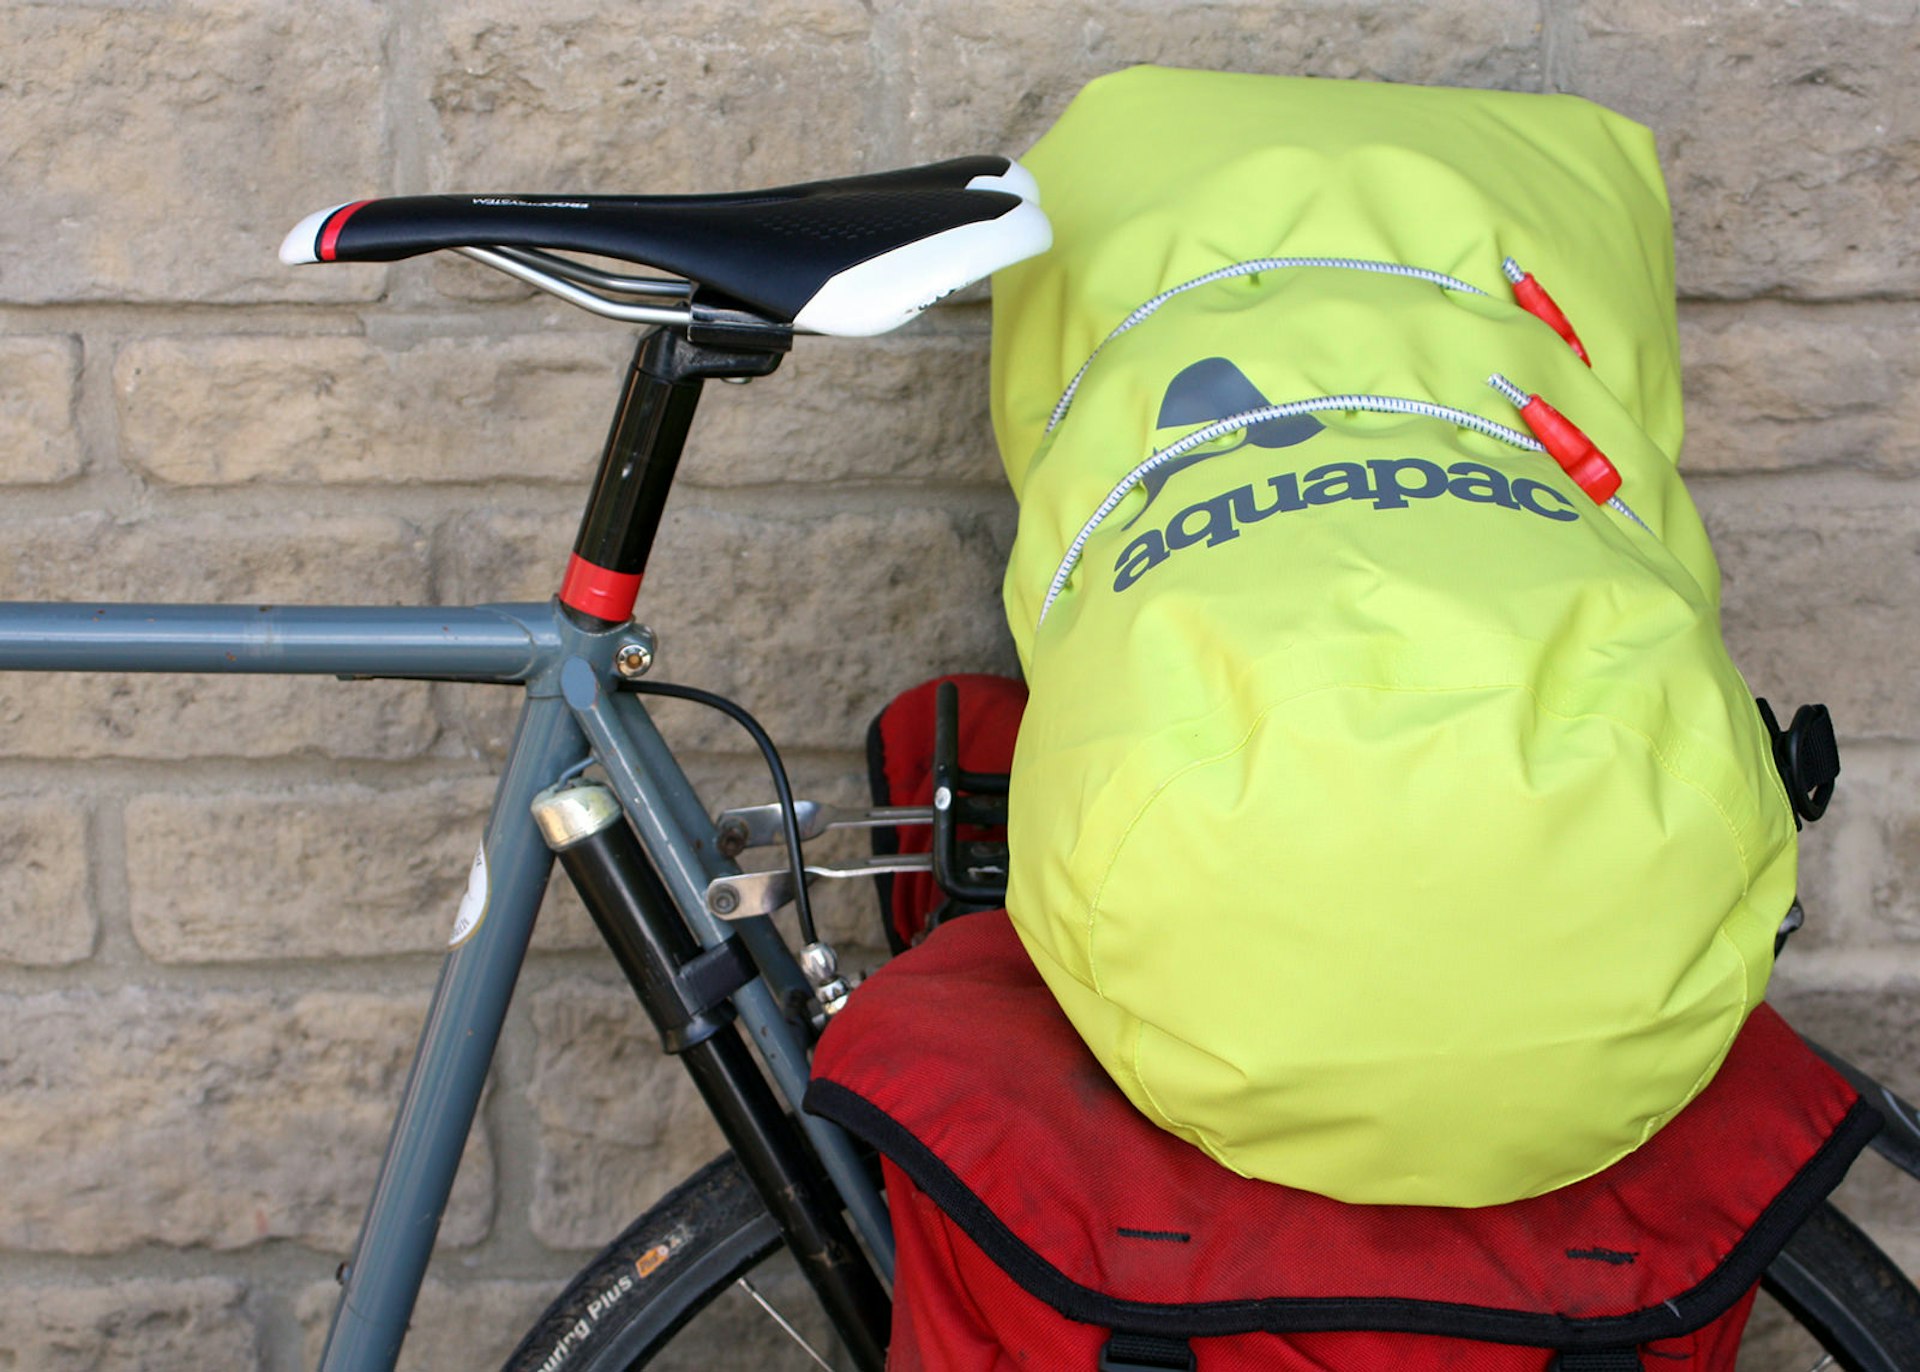 The Aquapac Trailproof Drybag is ideal for protecting bulky items © David Else / Lonely Planet